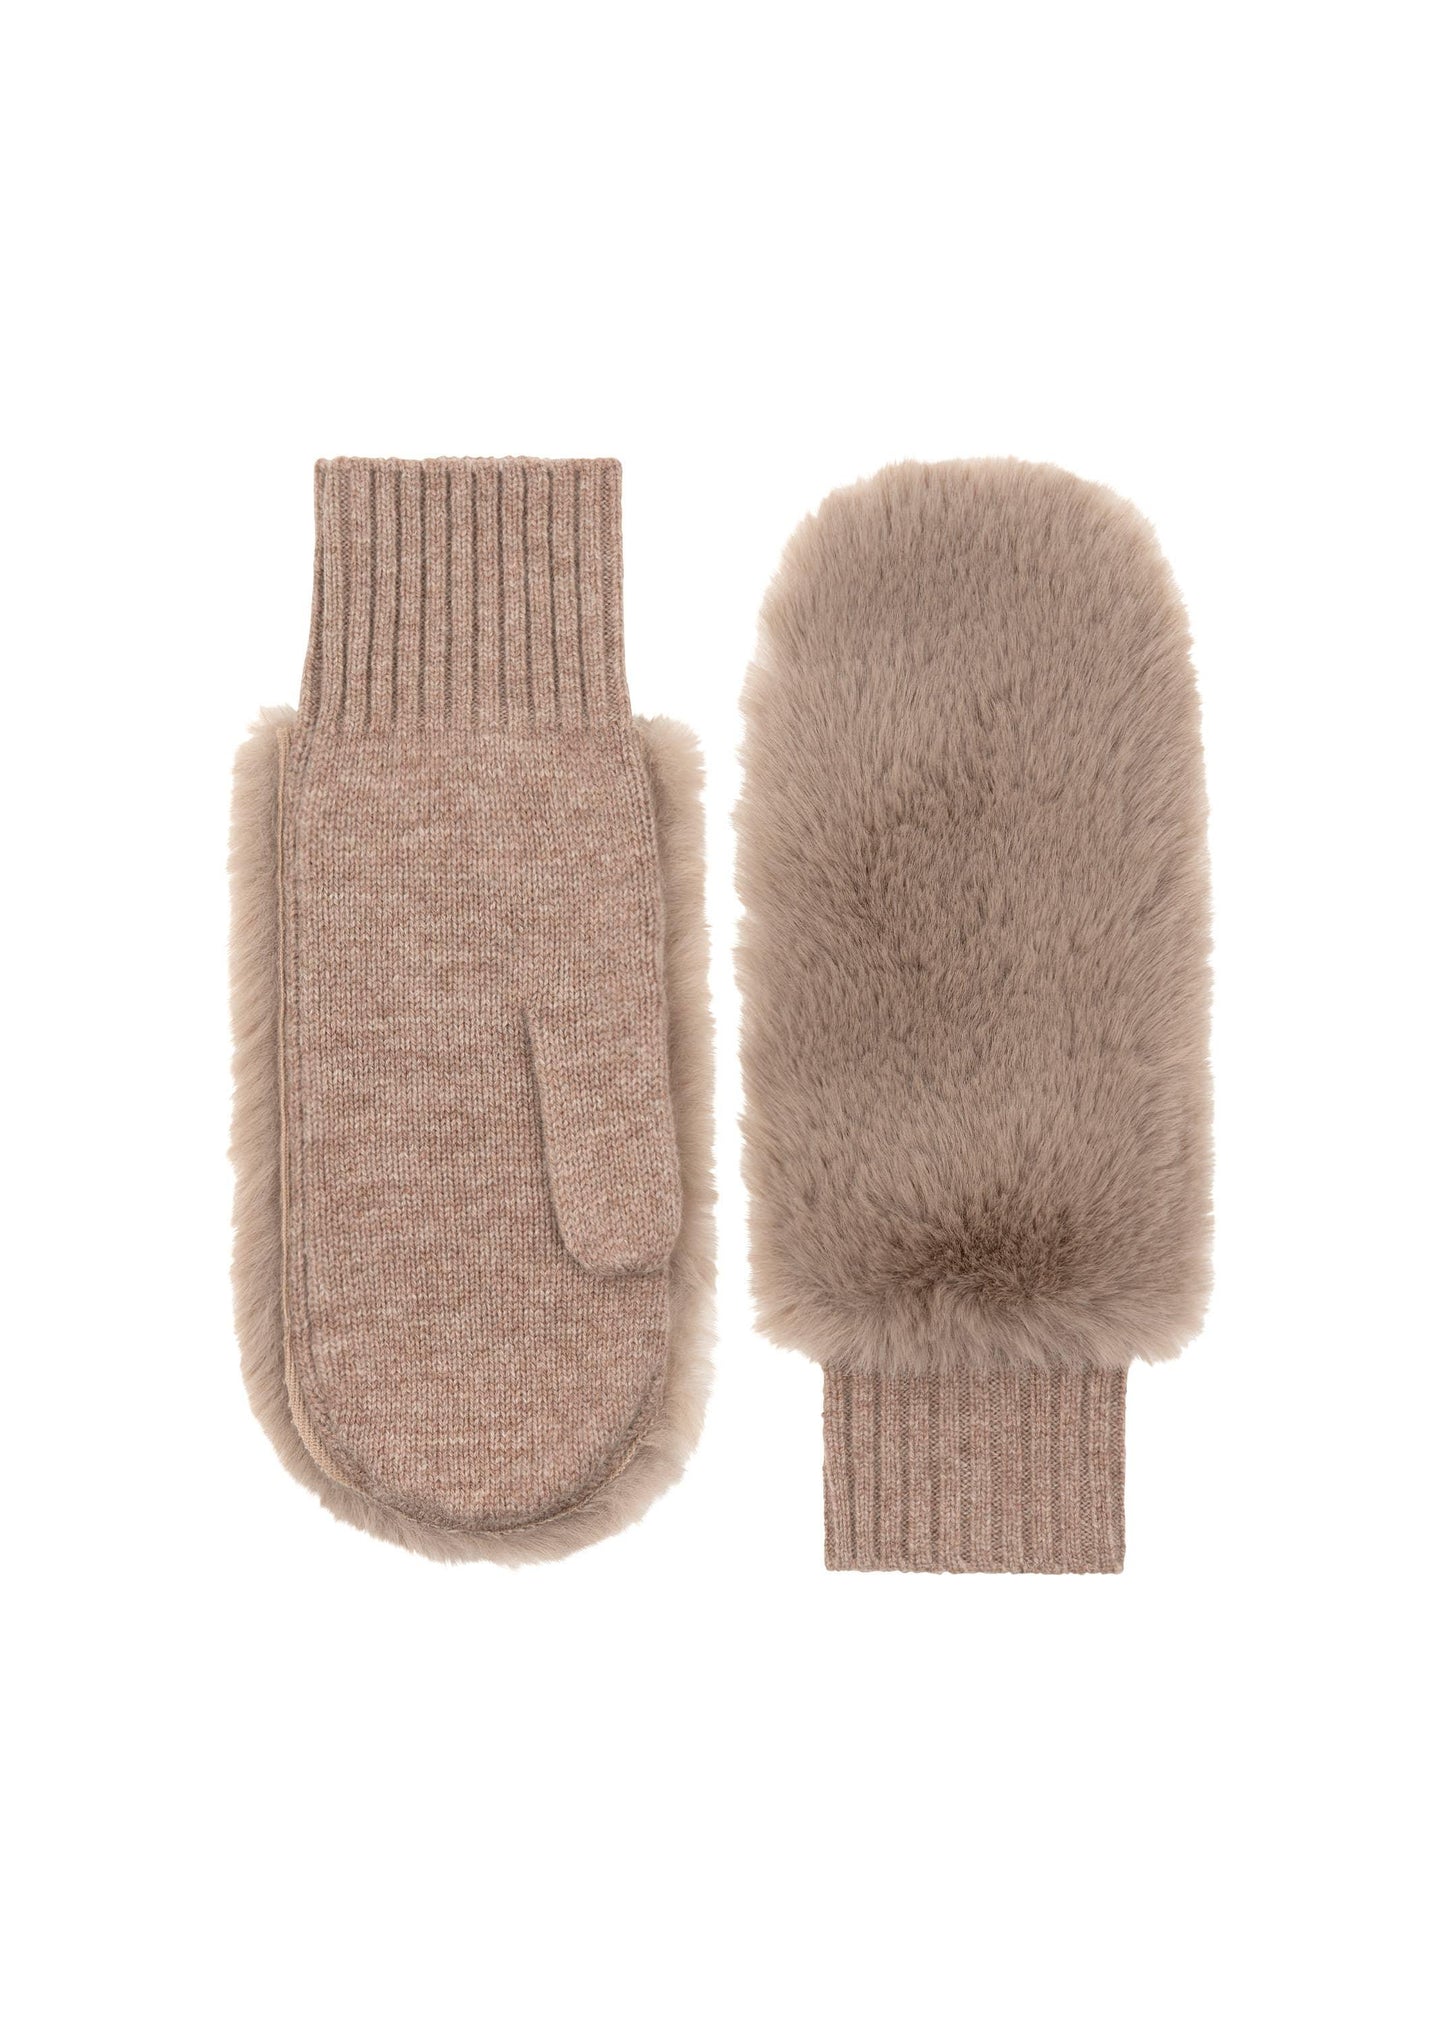 Faux Fur Mittens in Taupe by Amato New York